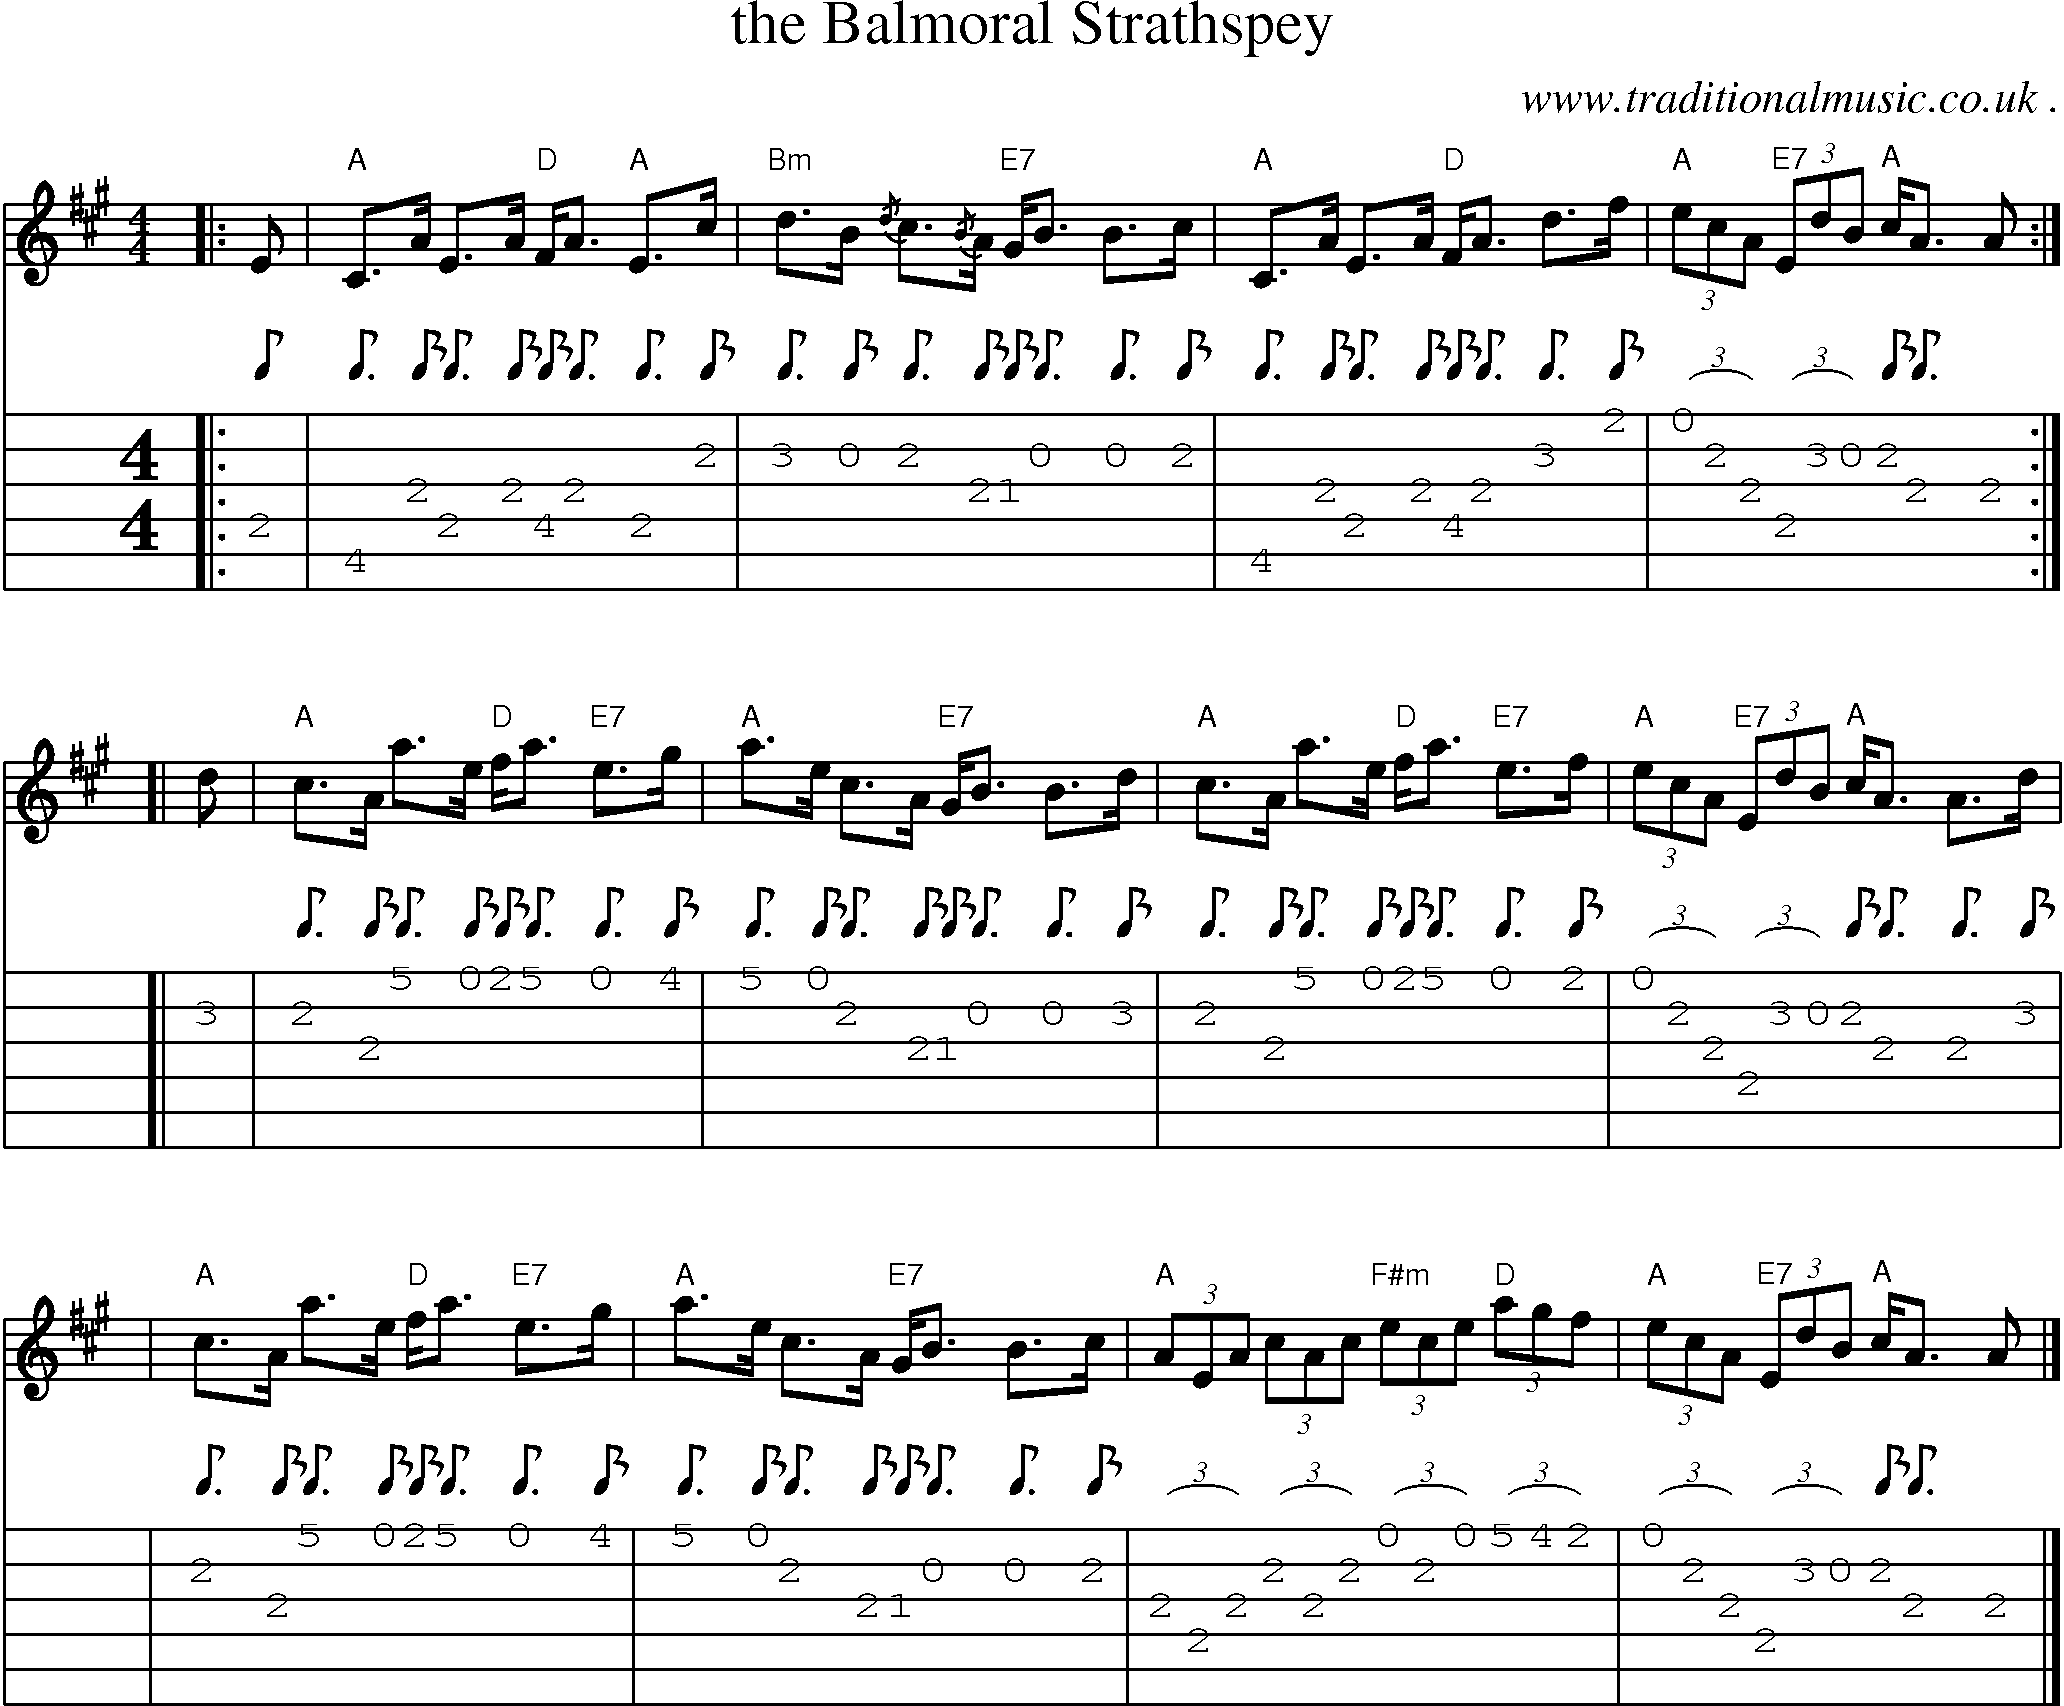 Sheet-music  score, Chords and Guitar Tabs for The Balmoral Strathspey